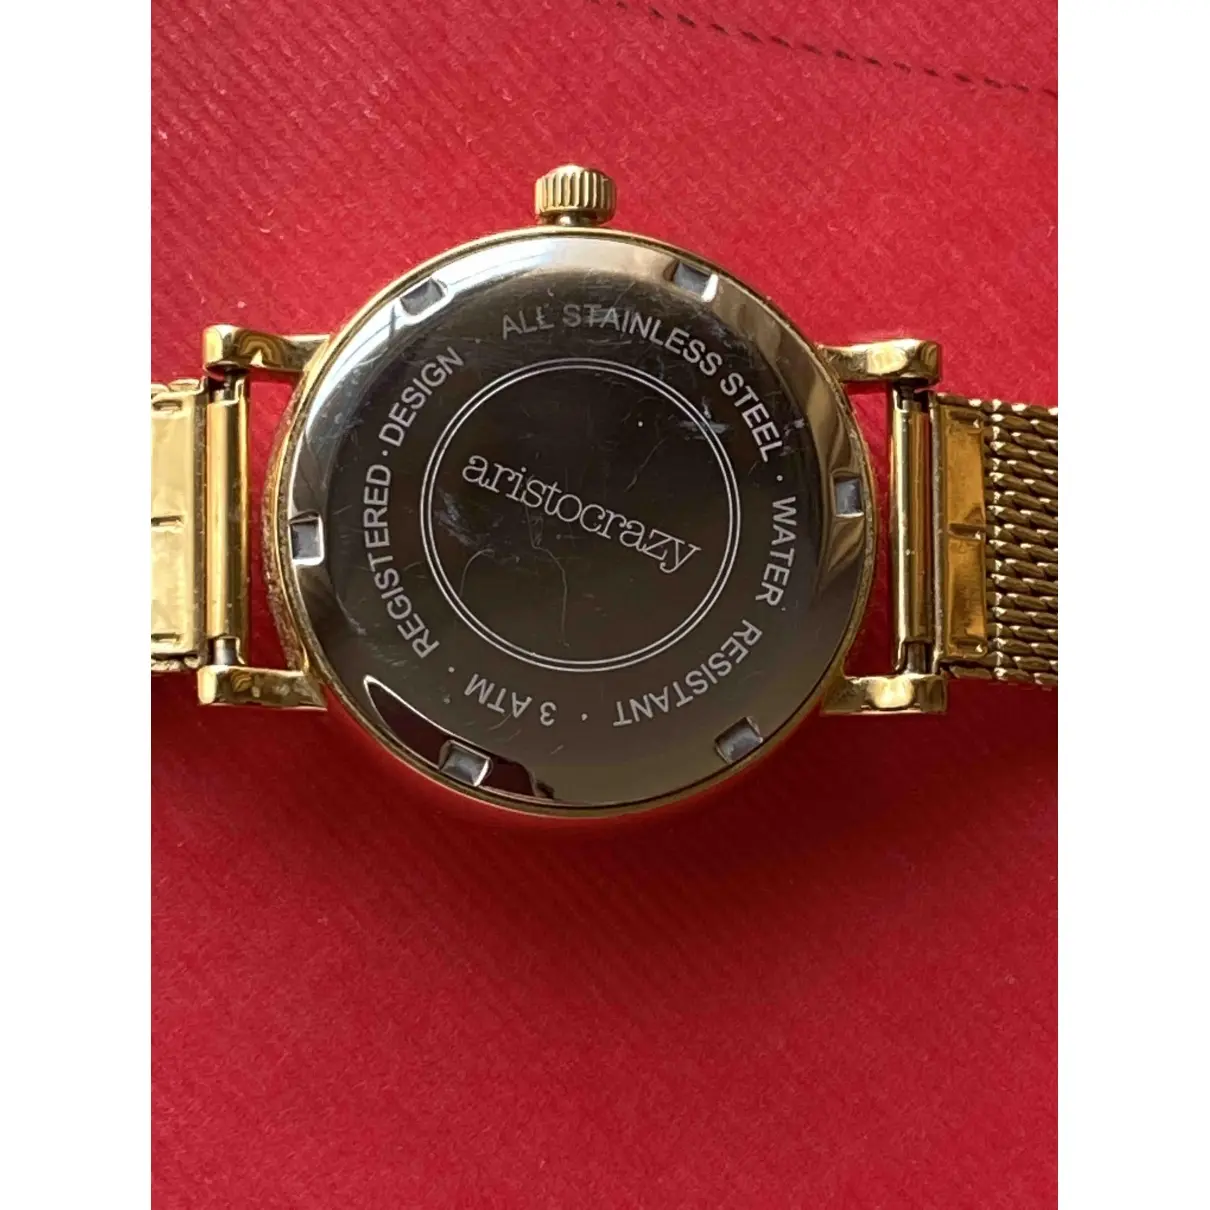 Aristocrazy Watch for sale